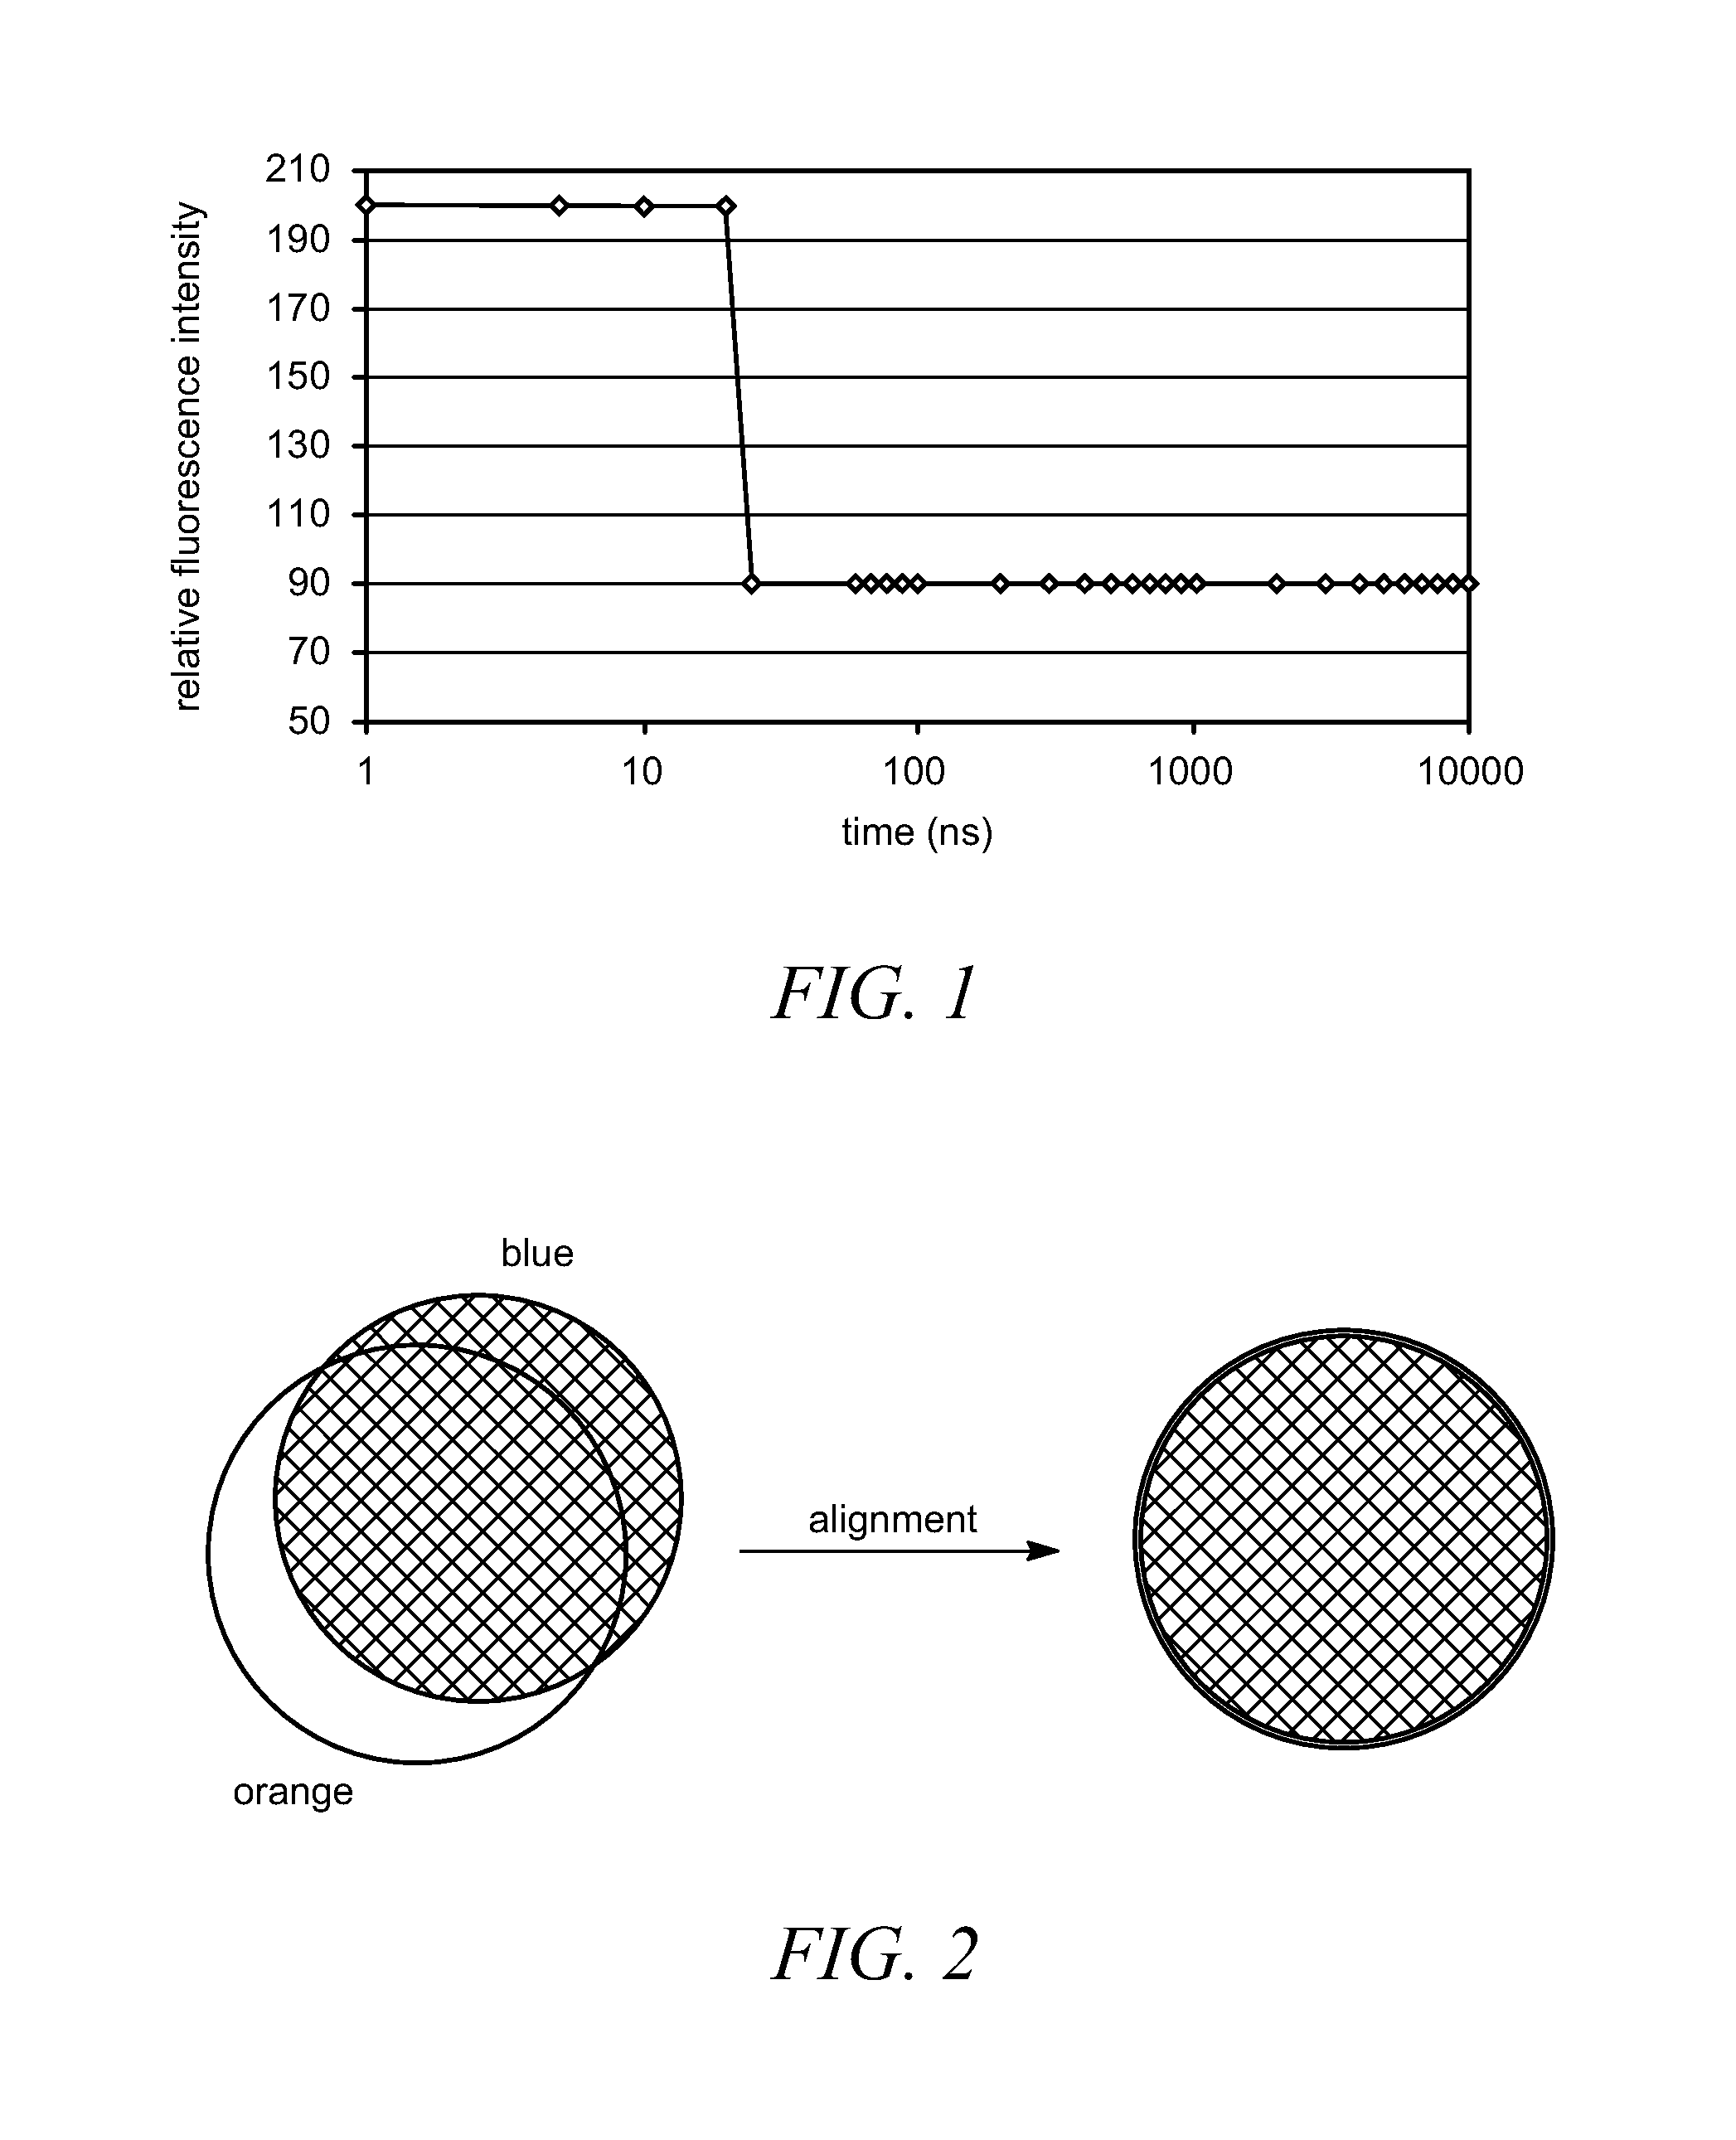 Microplates containing microsphere fluorescence standards, microsphere standards, and methods for their use